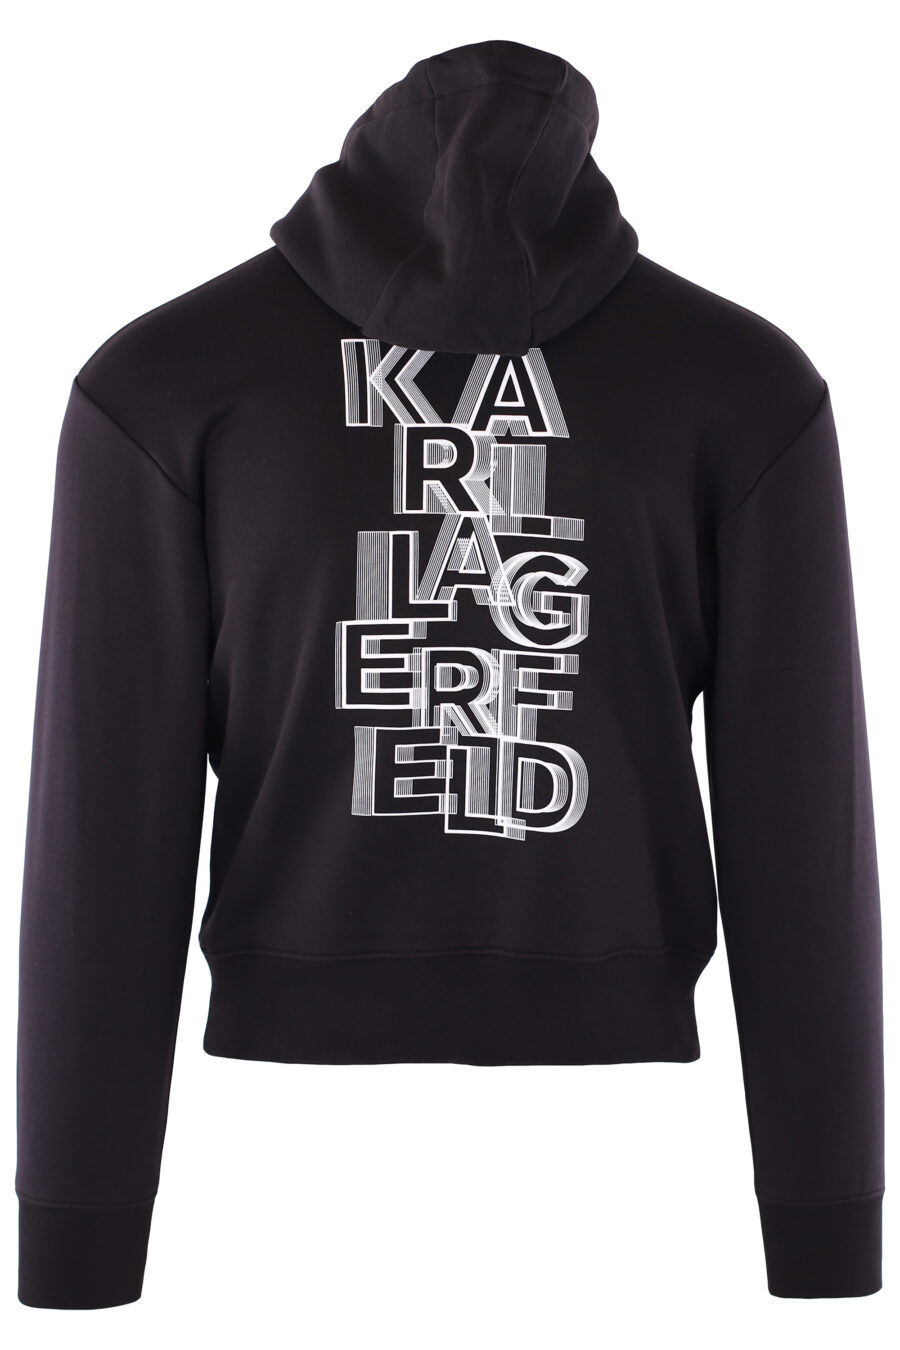 Black hoodie with graphic logo - IMG 6417